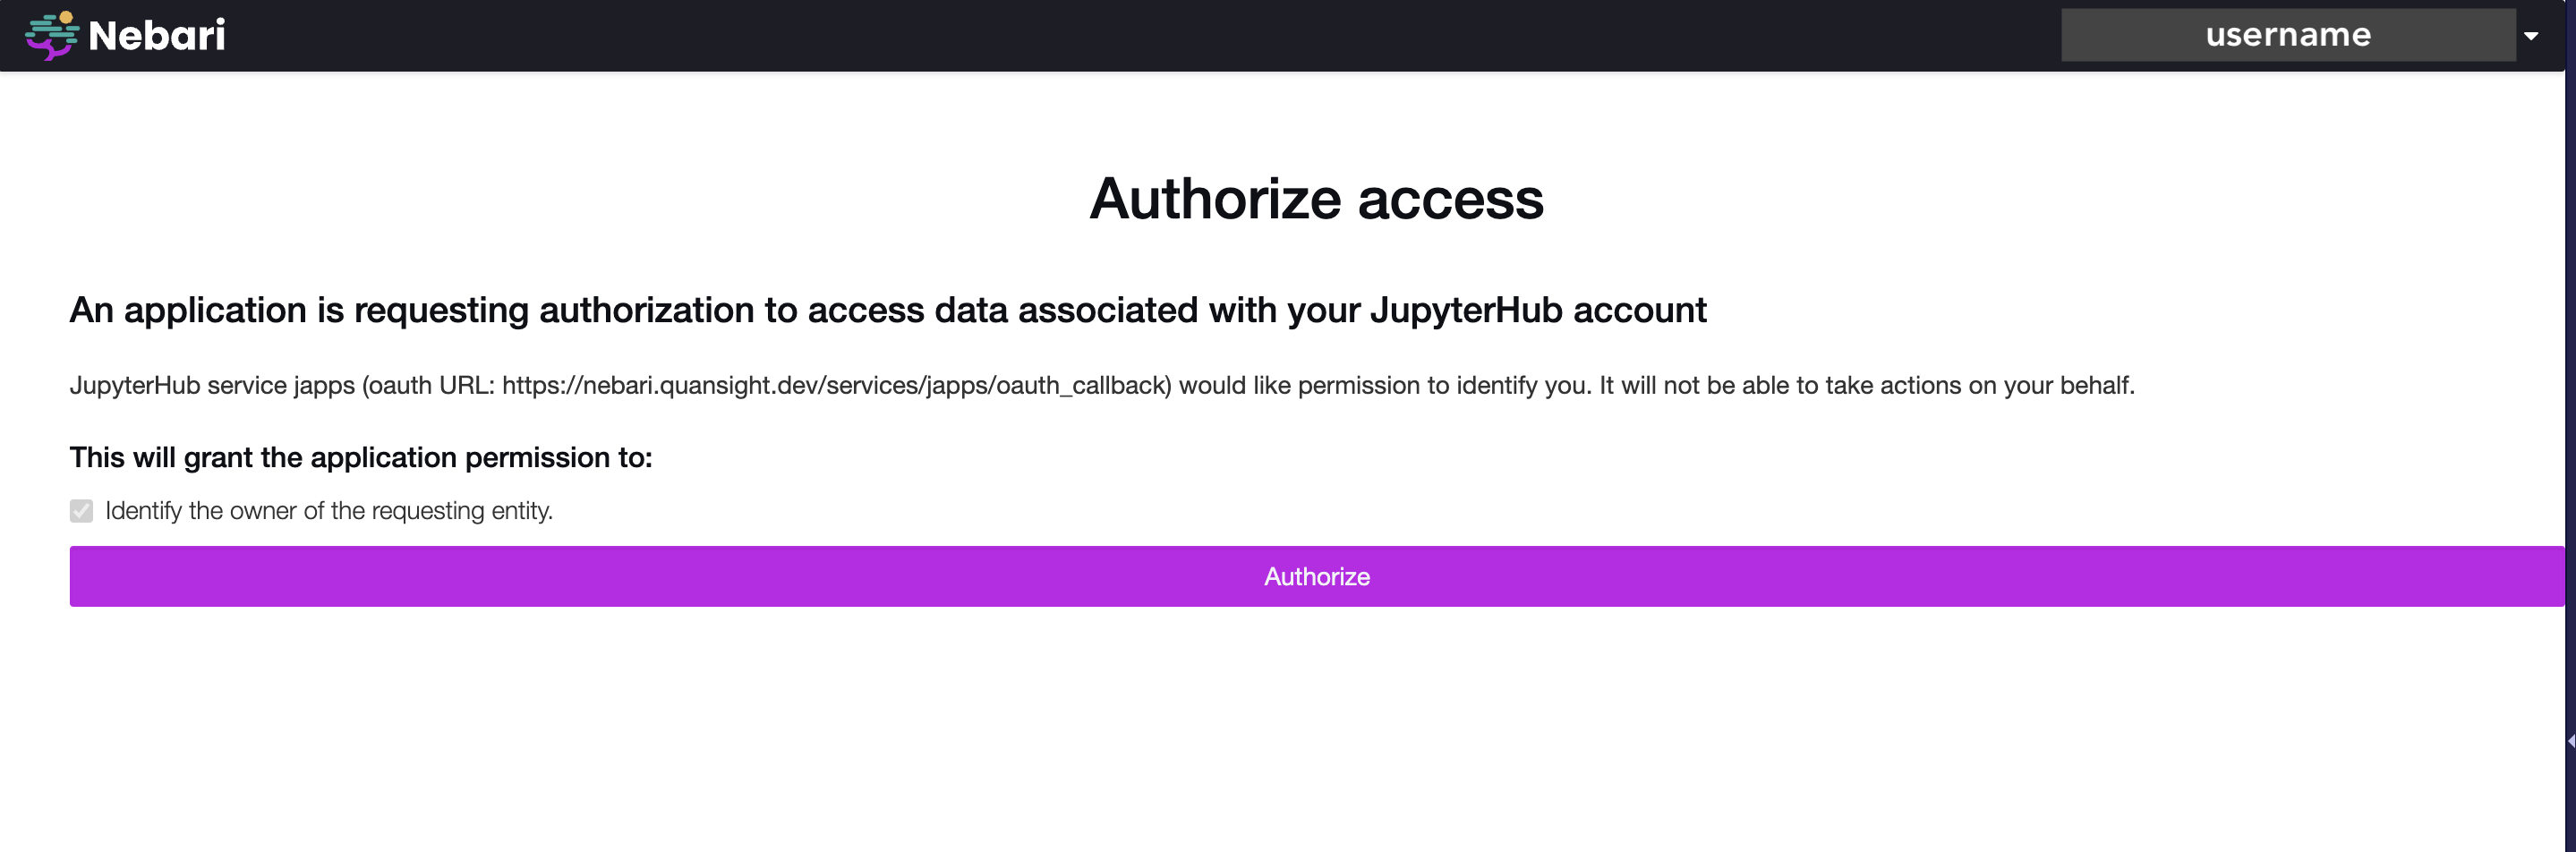 Authorize access page with an 'Authorize' button requesting access for JHub Apps, which is a Jupyter Service, to identify the user.